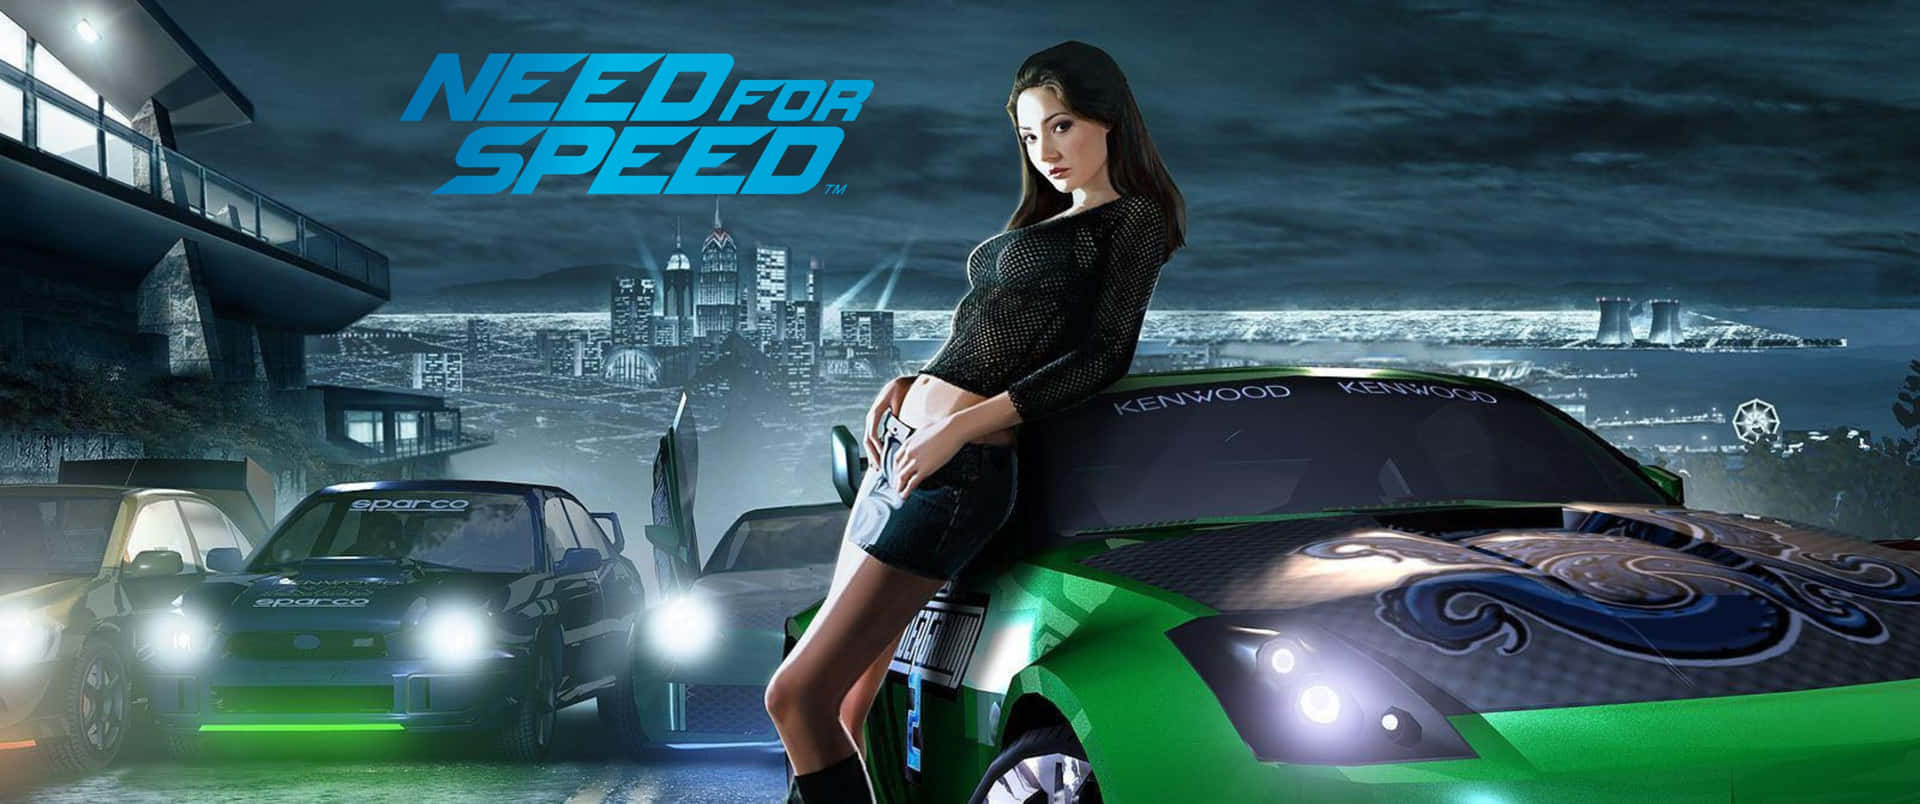 3440x1440p Need For Speed Background Wallpaper